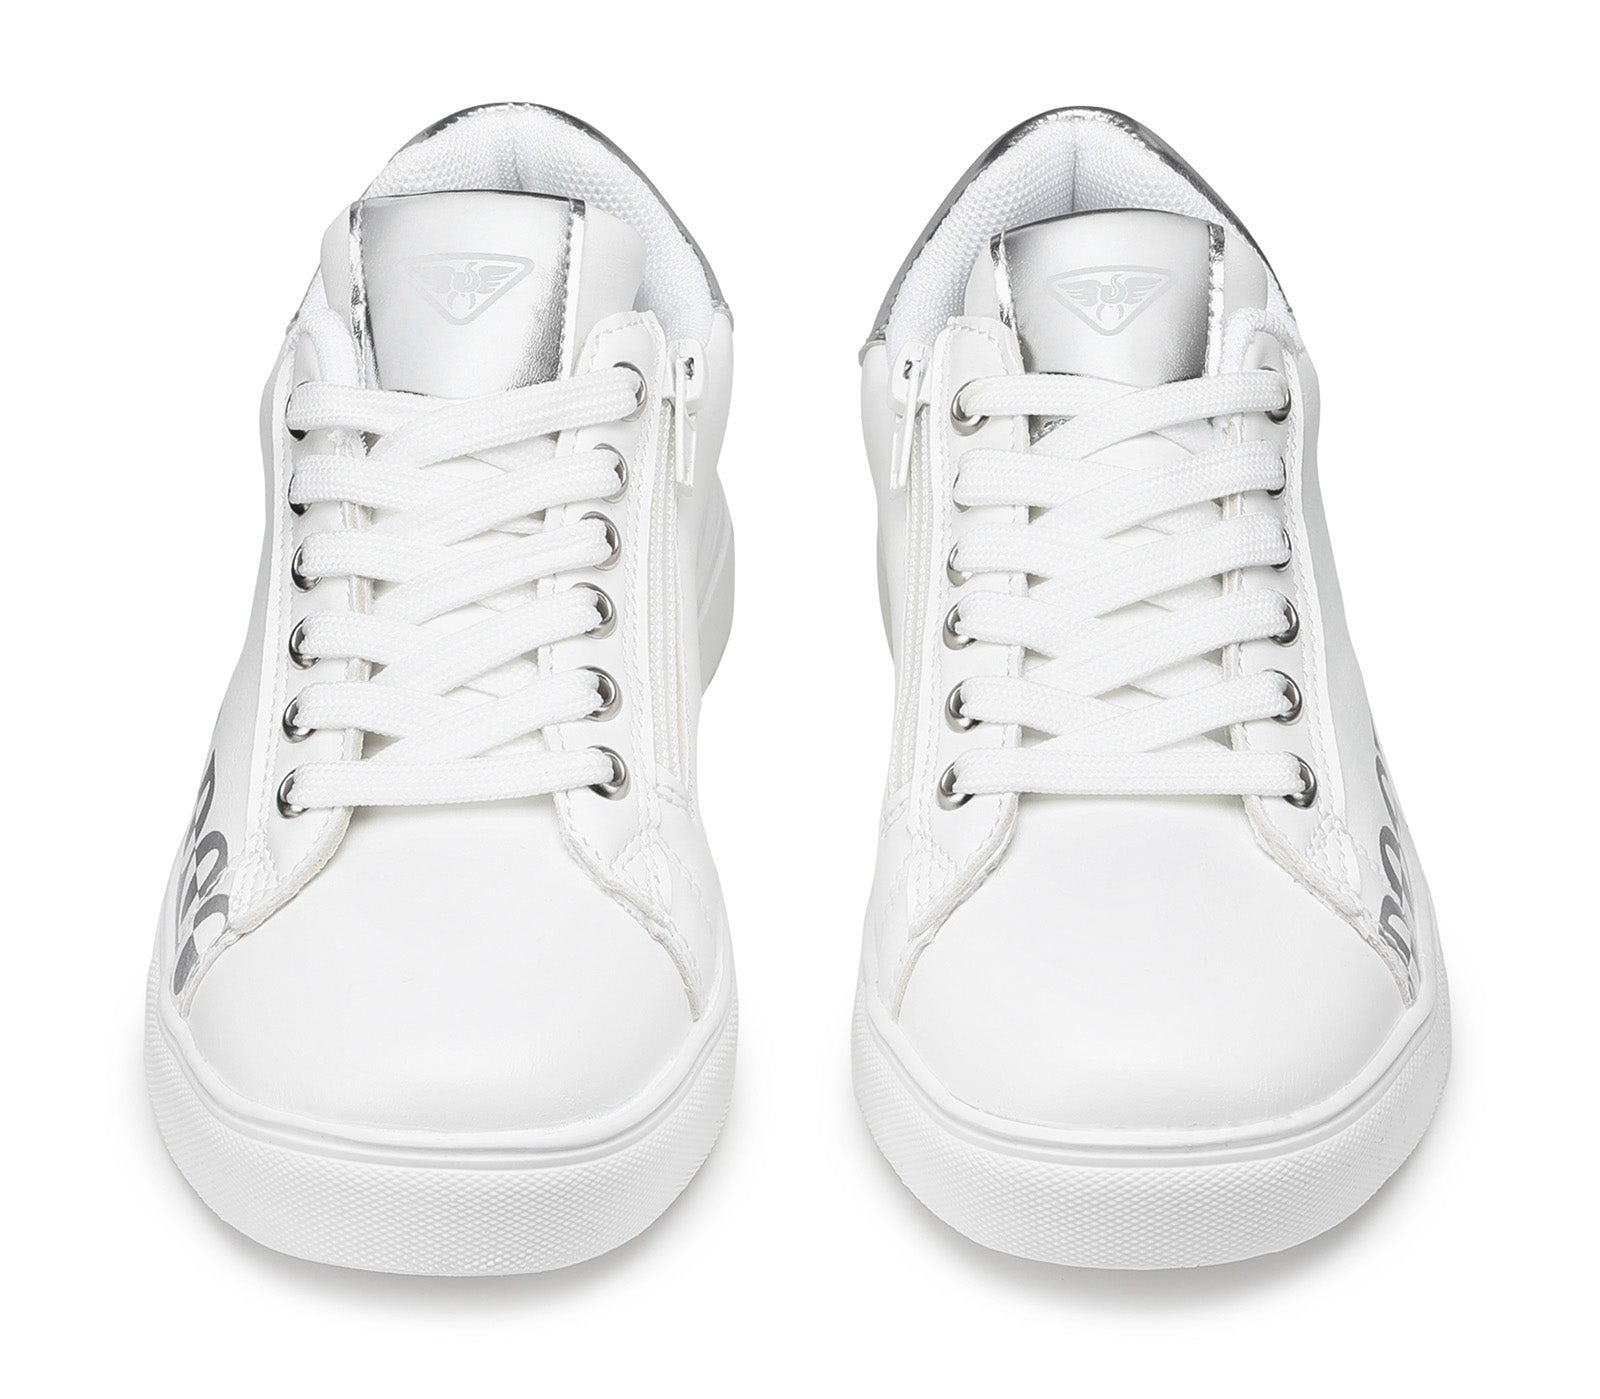 Children's Sneakers White and Silver